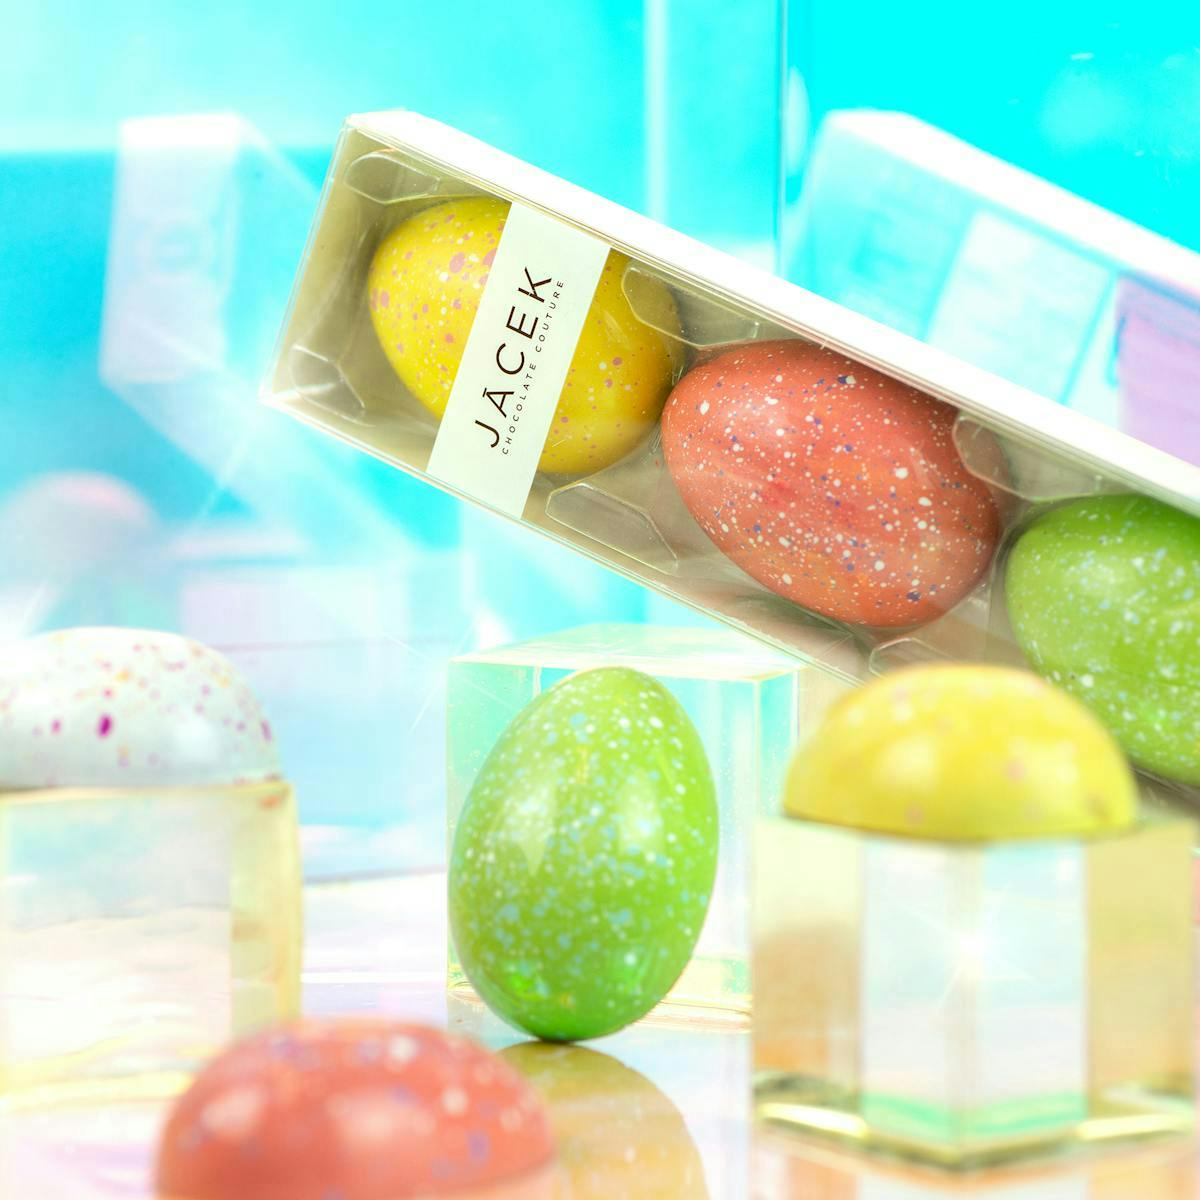 Colourful chocoalte eggs in a package with the label Jacek.